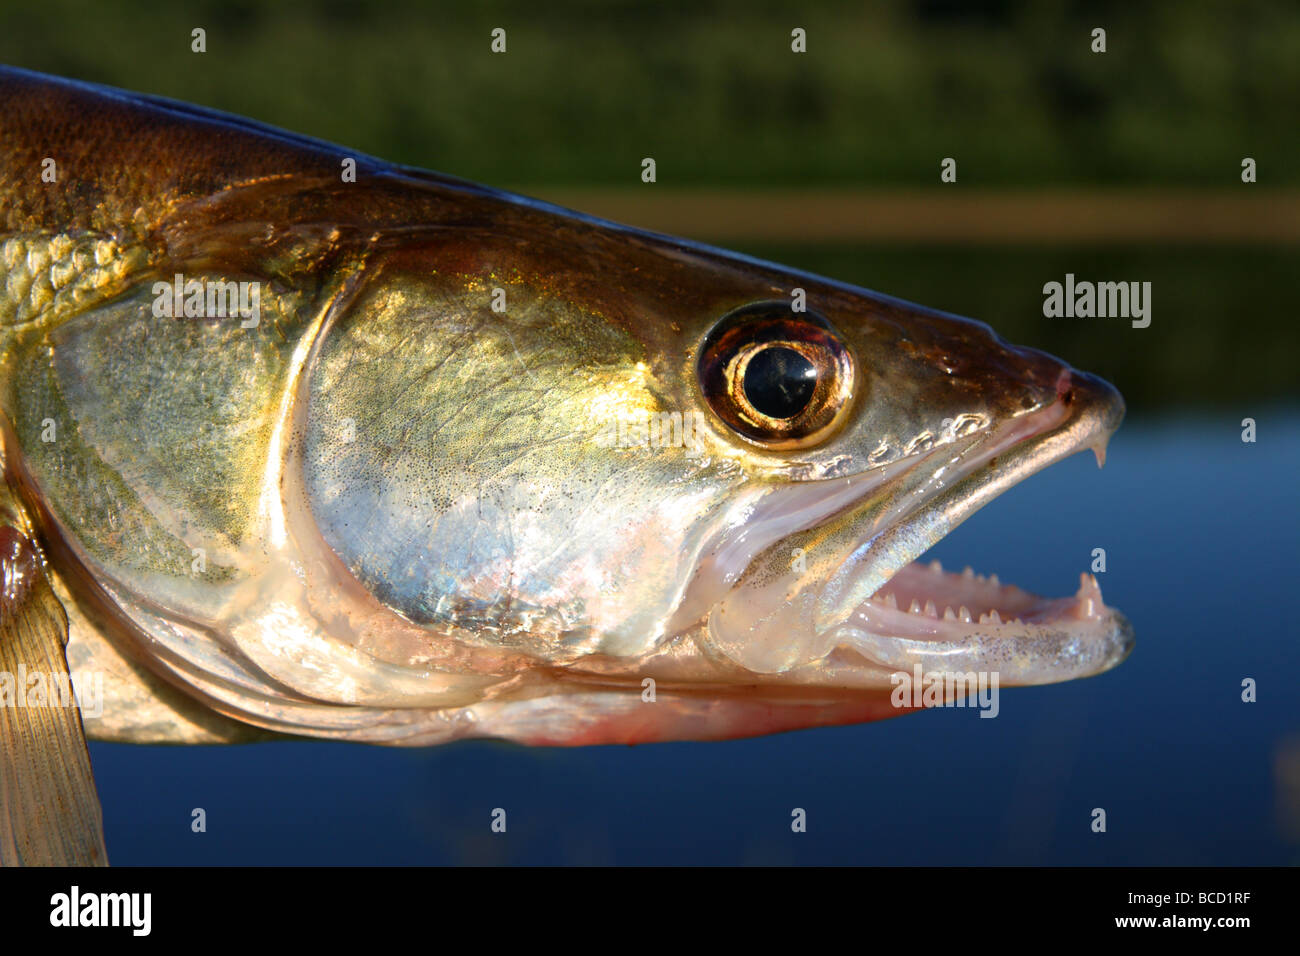 zander fish head with open mouth close up Stock Photo